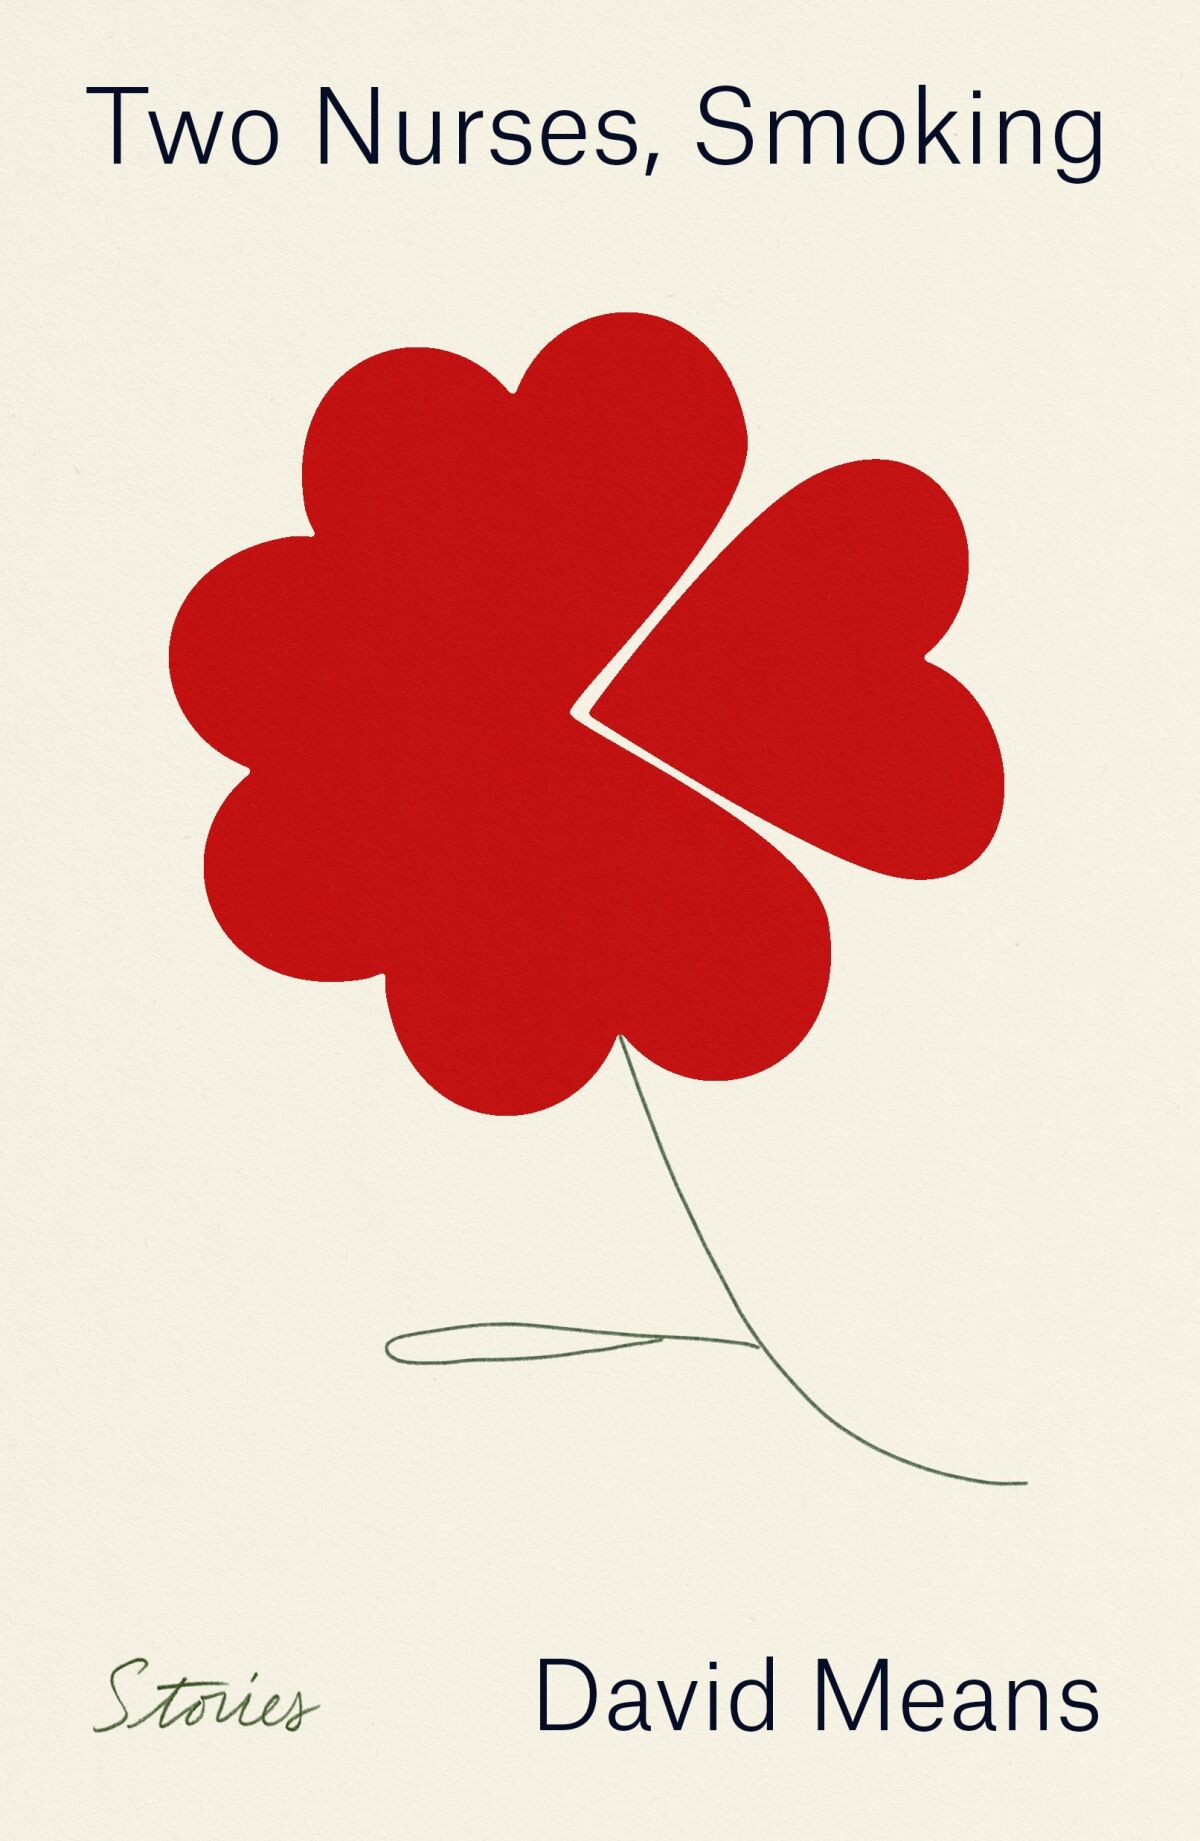 The cover of "Two Nurses, Smoking" by David Means, shows a flower made up of flat red hearts